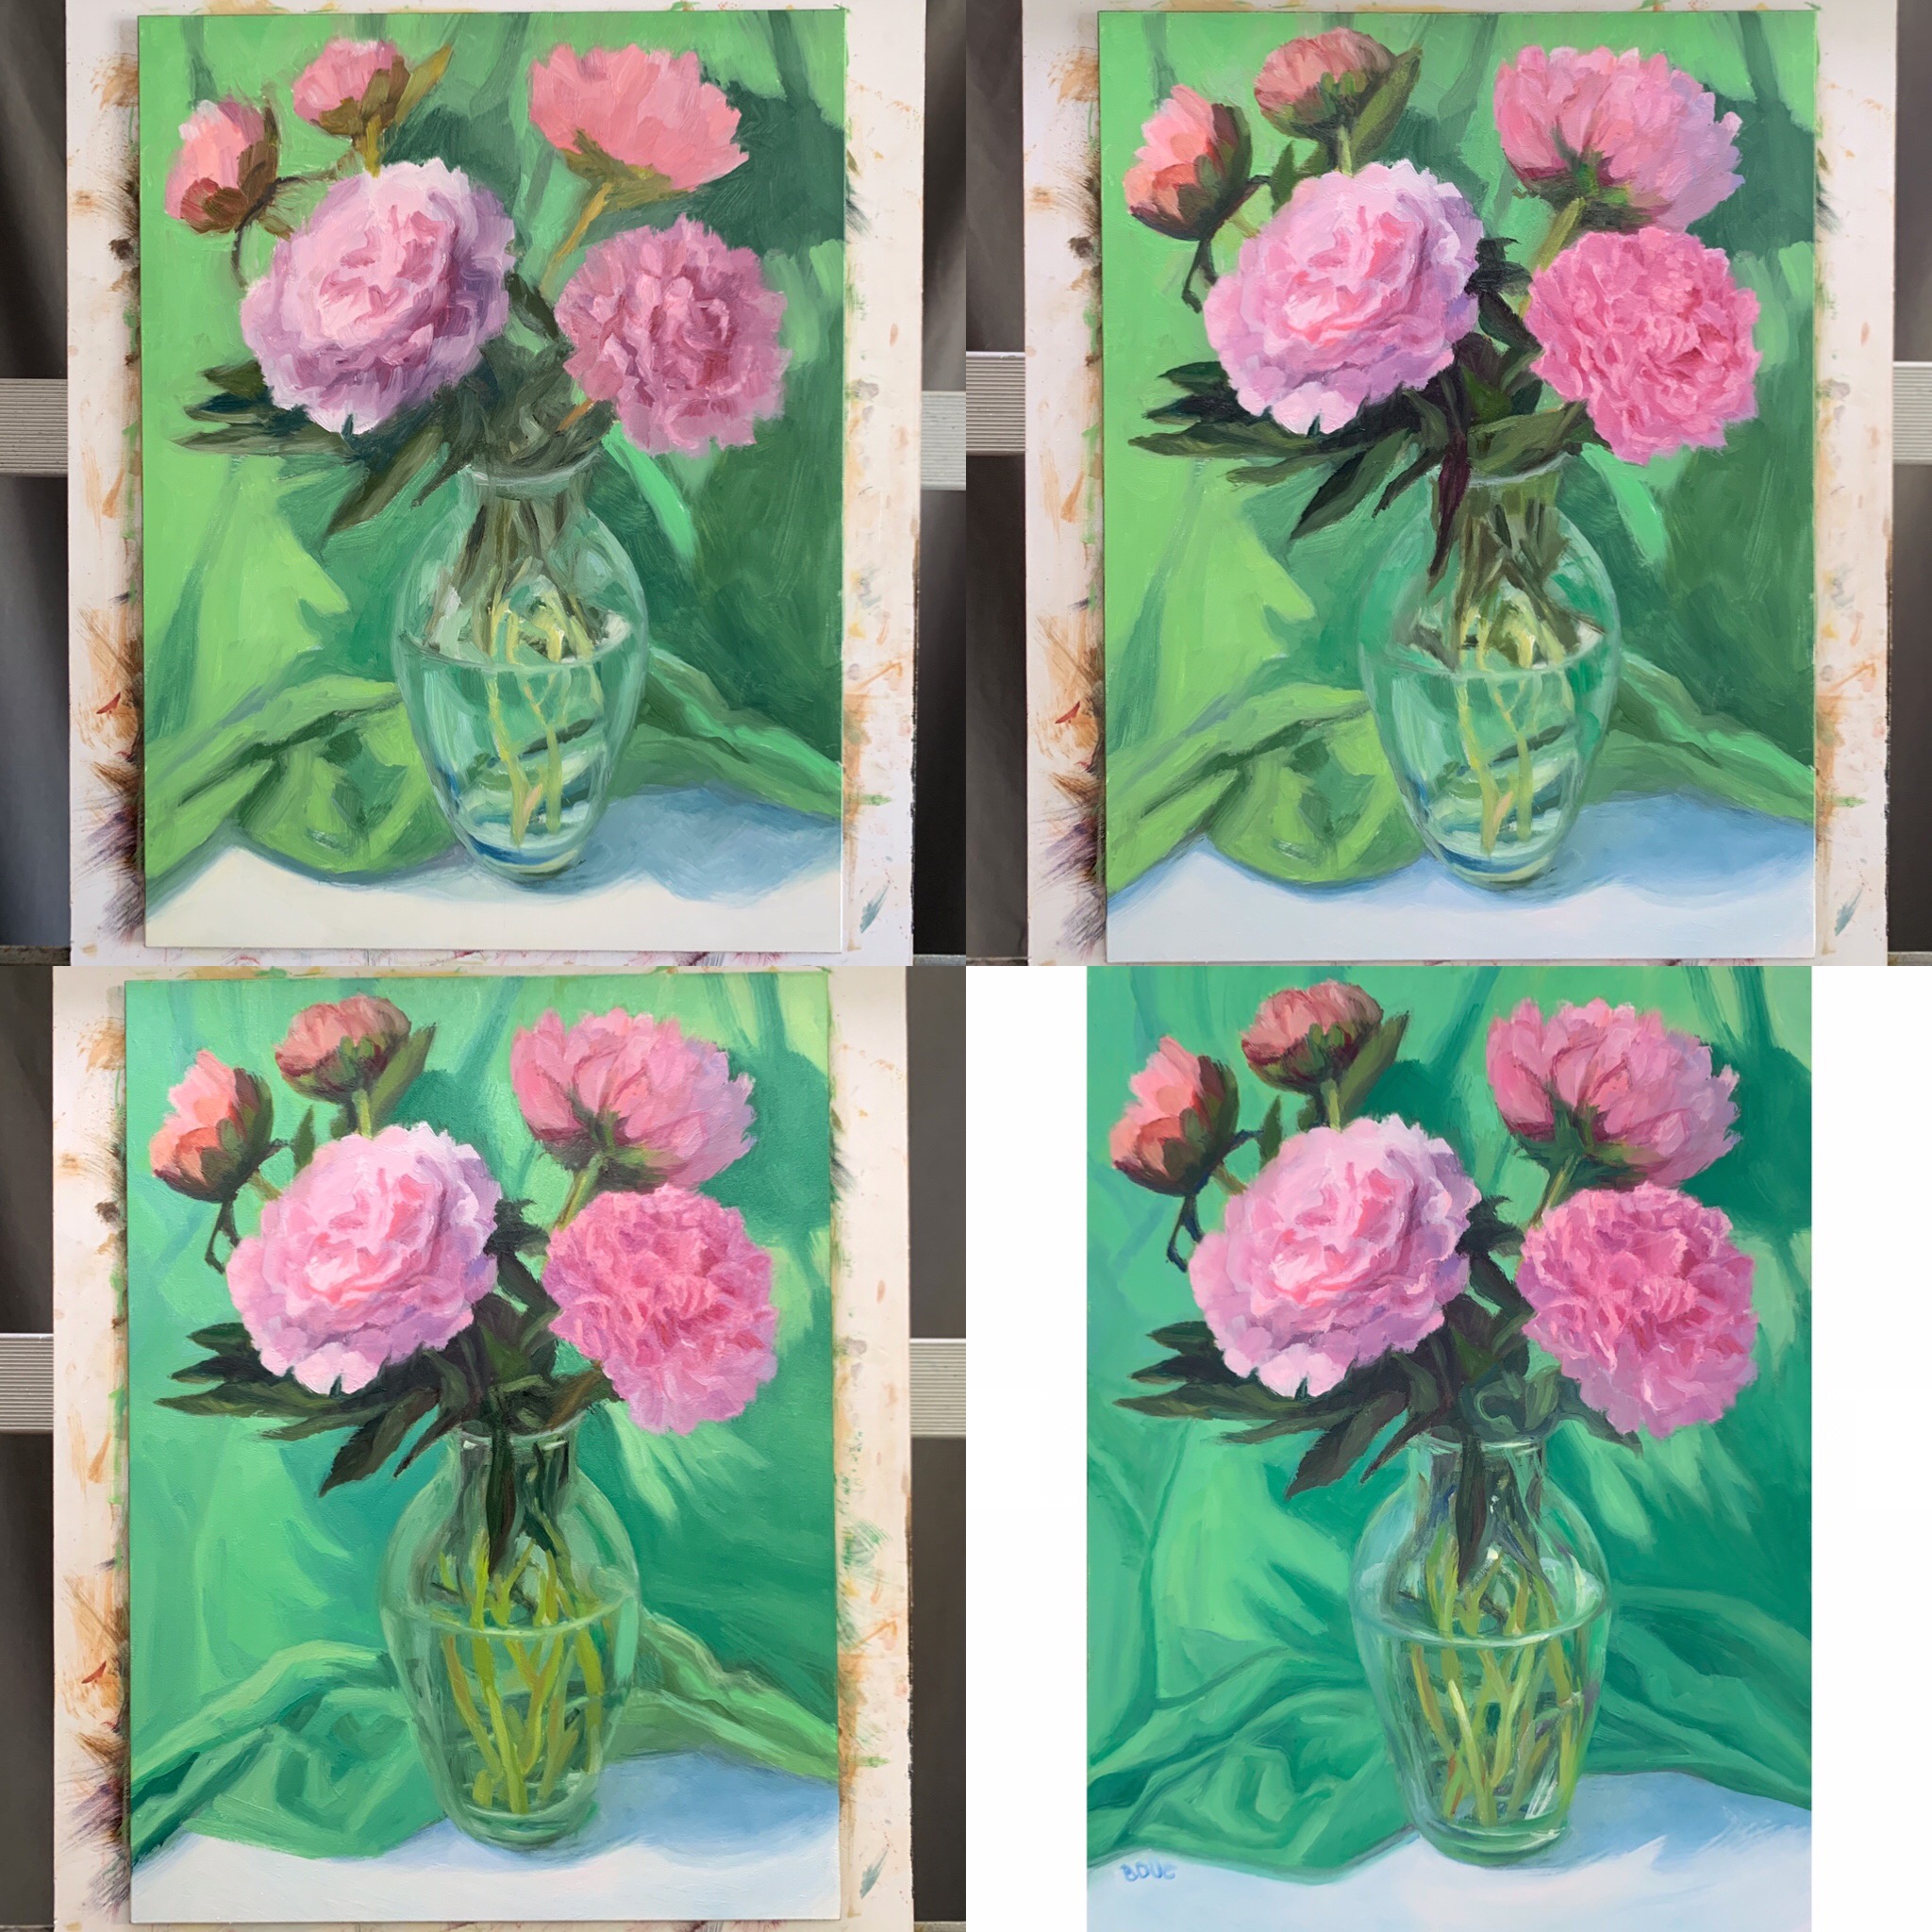 Working on the flowers then the background and the vase to strengthen shapes and values